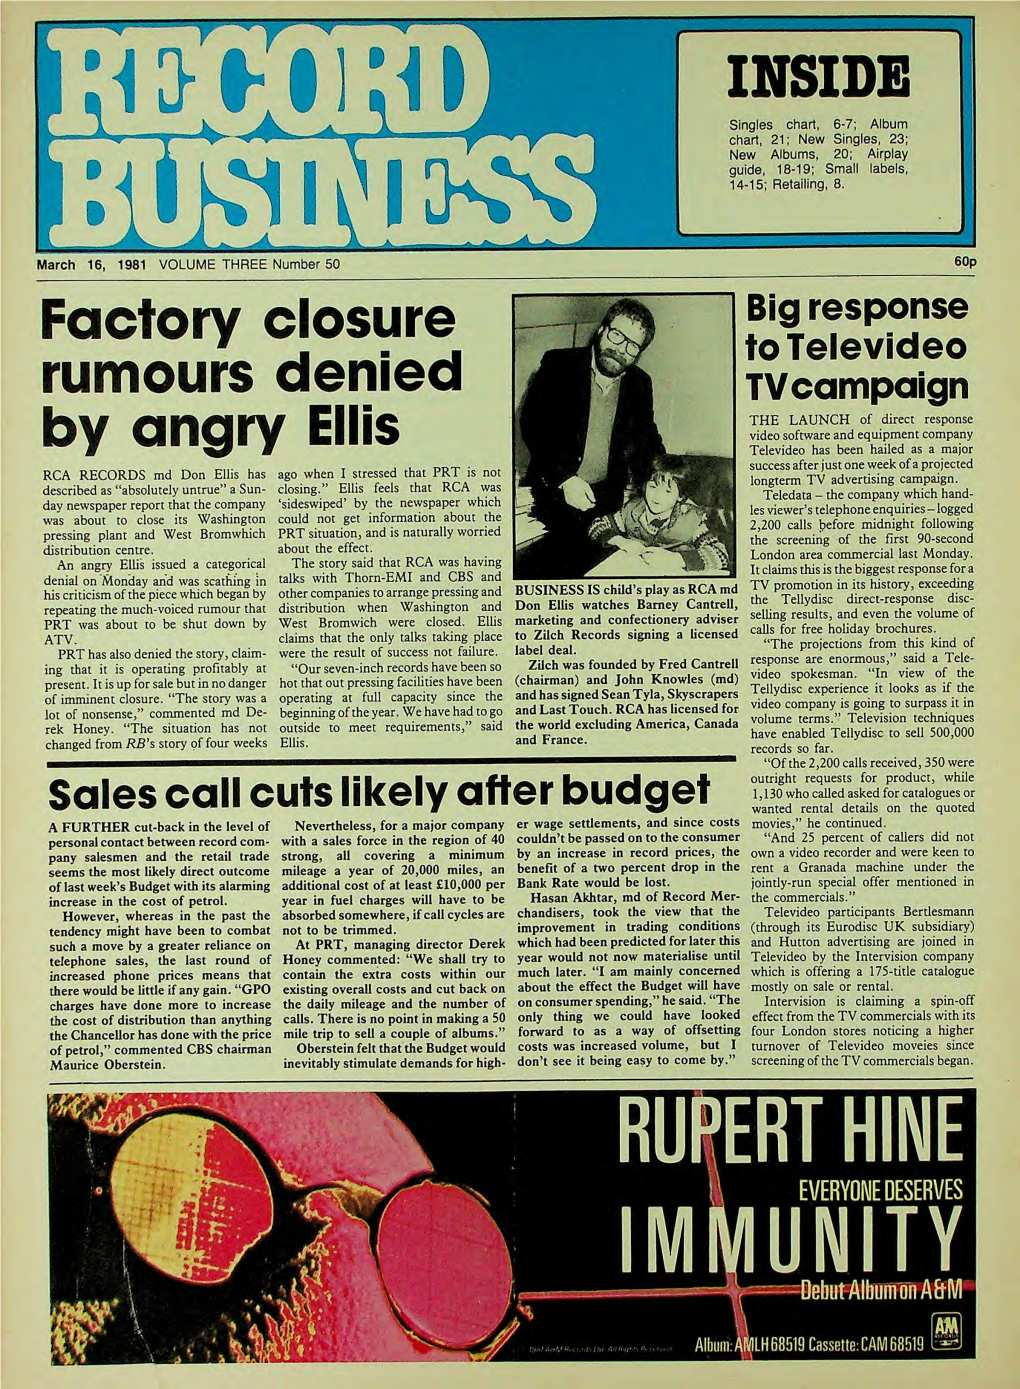 Record-Business-1981